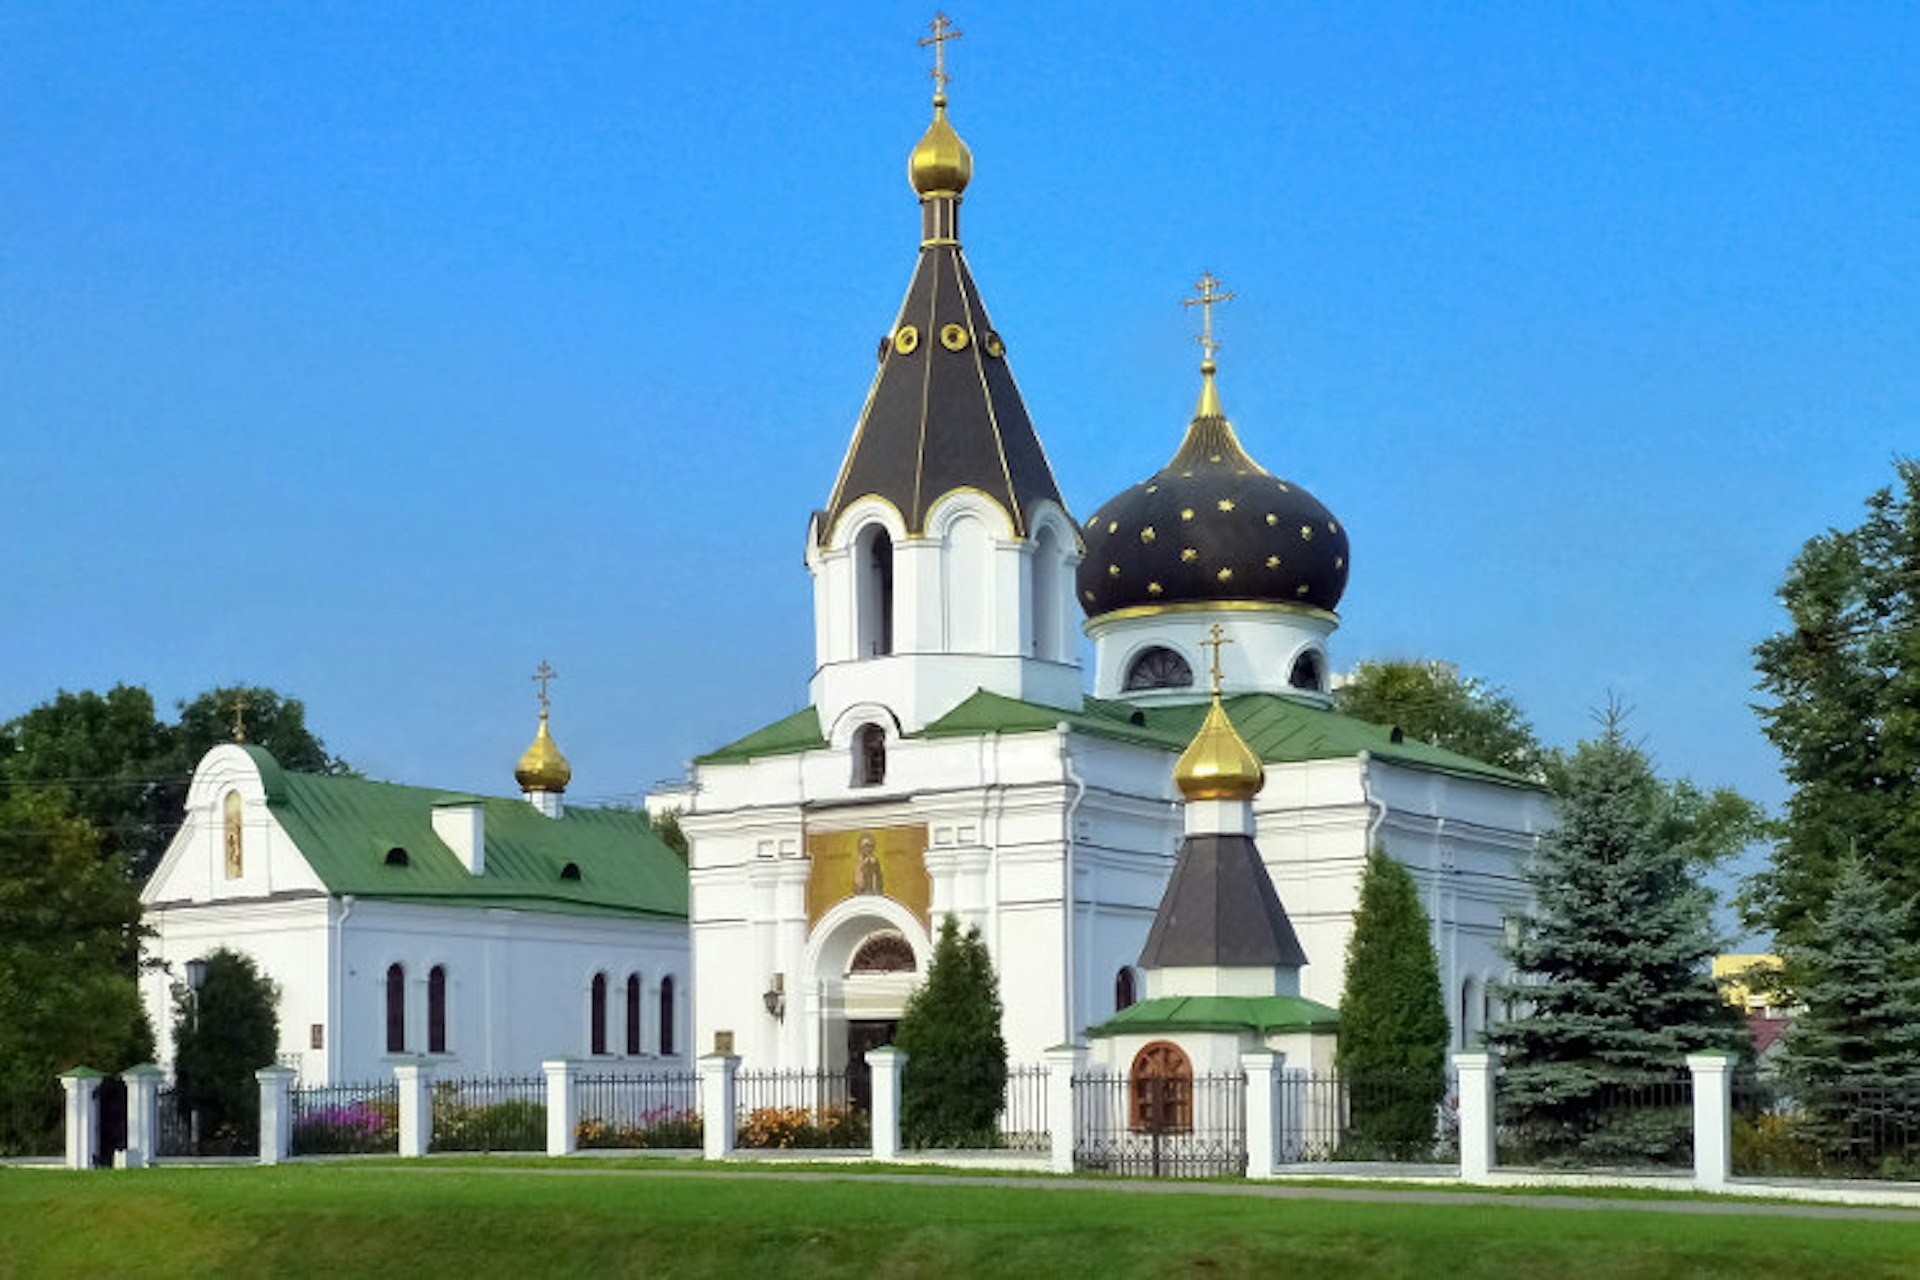 St Mary Magdalene Orthodox church, Minsk. Image by Sir Francis Canker Photography / Getty Images